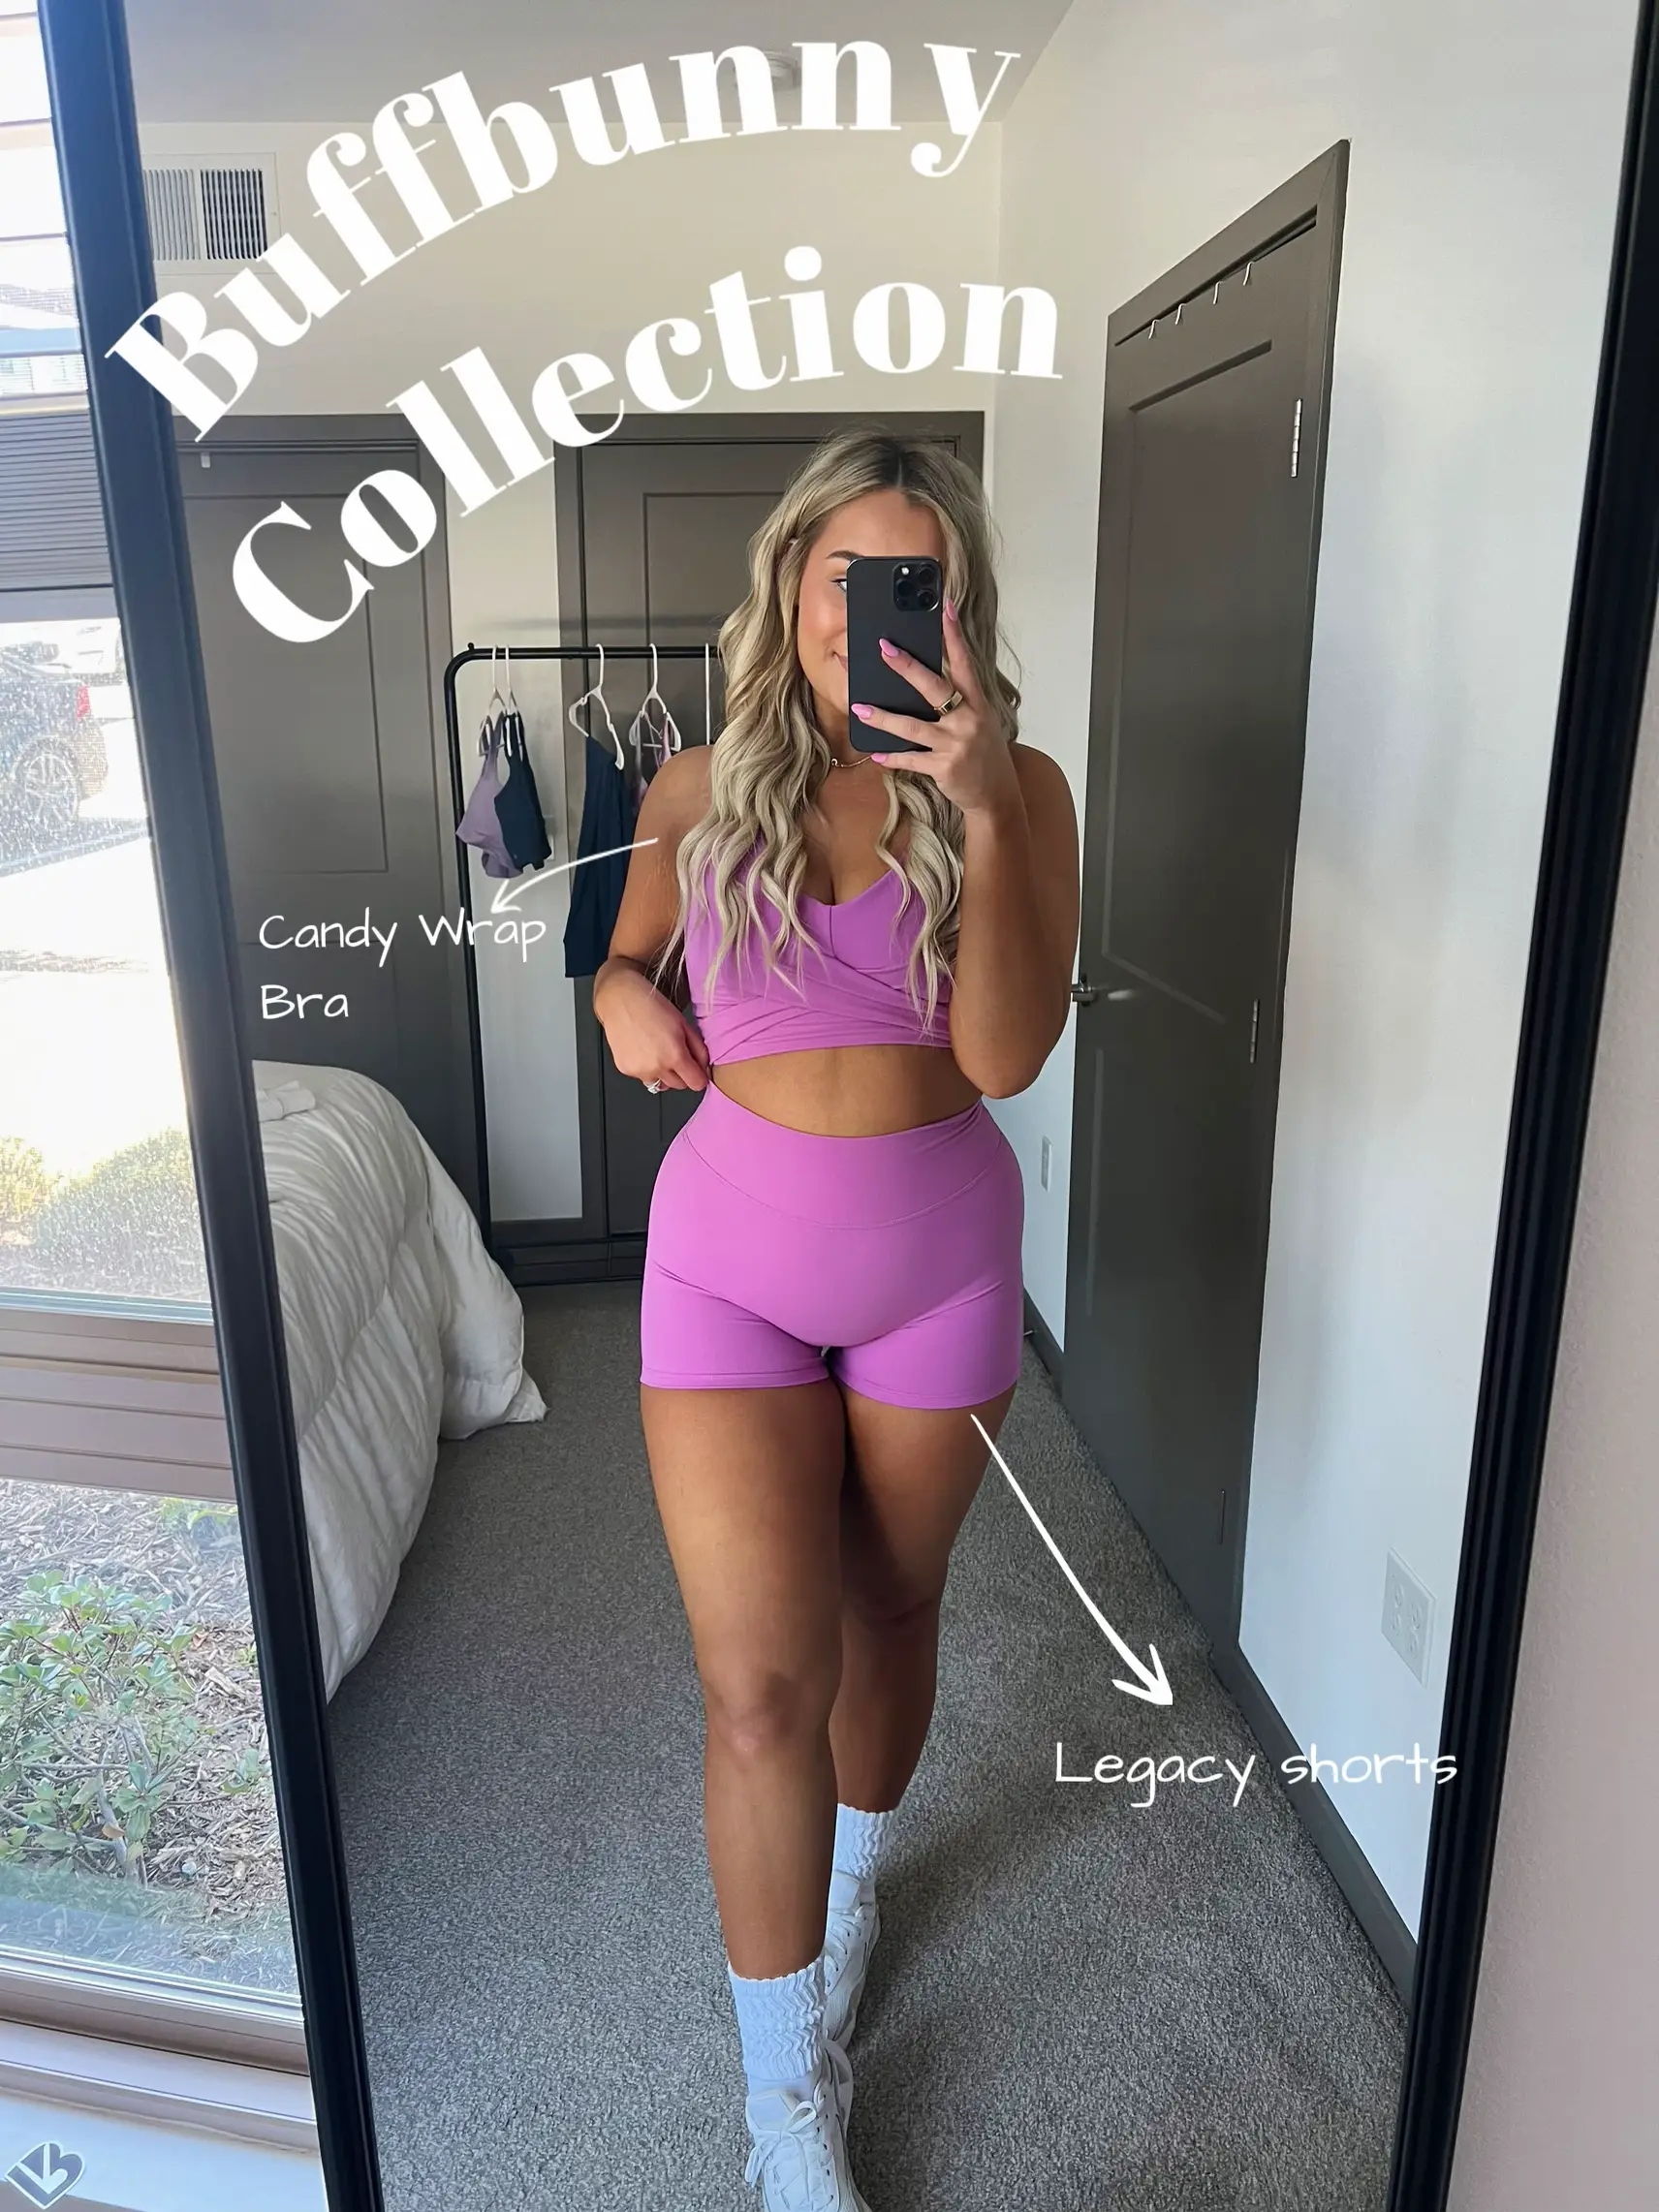 buffbunny_collection sent me some absolutely cute gym clothes! Try